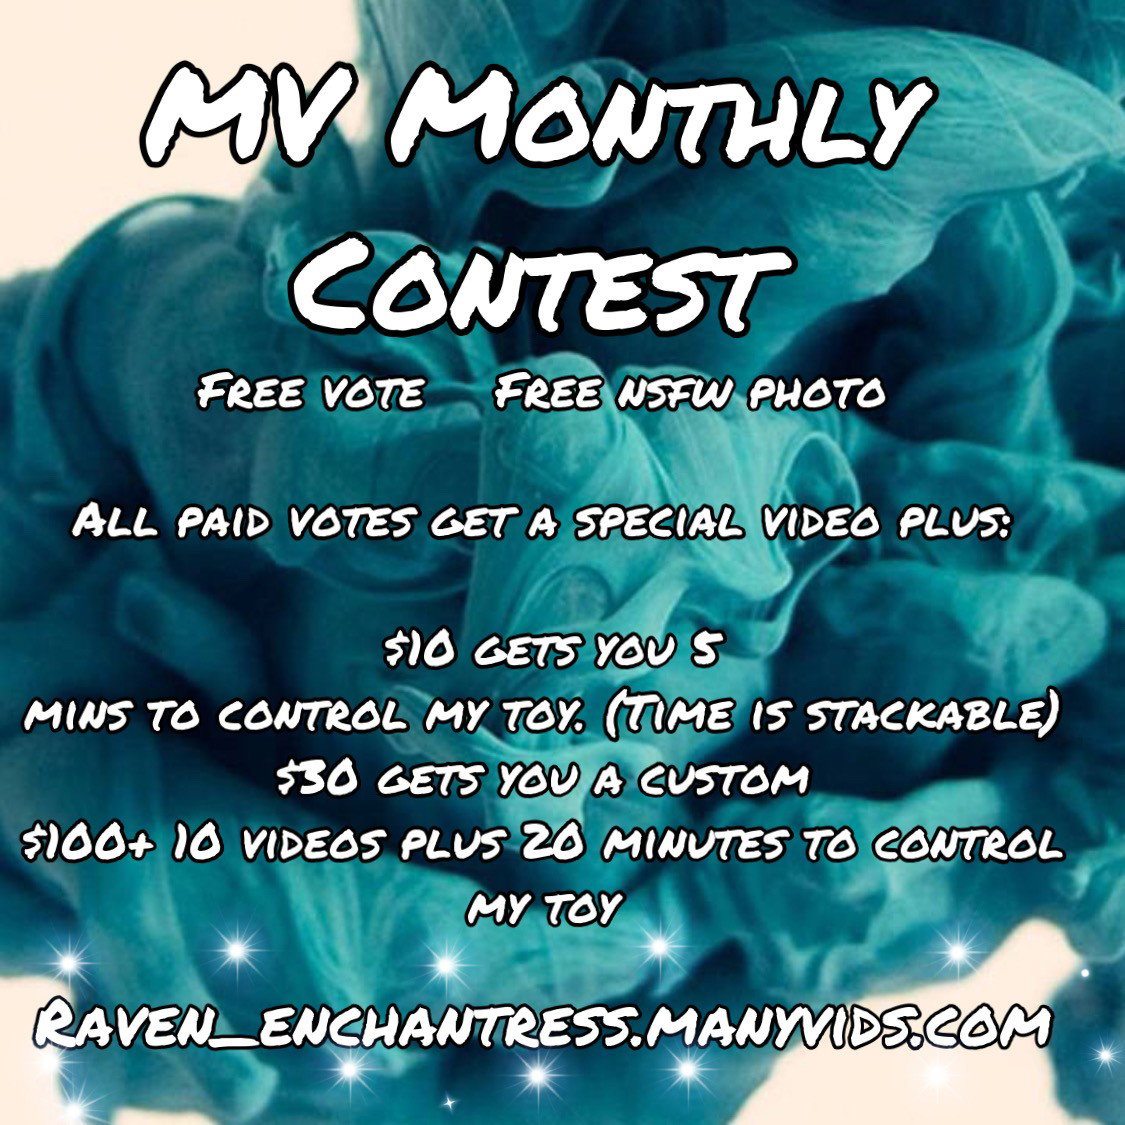 Photo by Raven_Enchantress with the username @curvyraven, who is a star user,  May 18, 2020 at 1:45 PM and the text says 'Raven_enchantress.manyvids.com/contest/3335

I just entered into this month’s contest. Every vote will receive a thank you! 

Free vote/ free NSfW photo
$10/ 5 min control my toy (stackable)
$30/  1 custom 
$100/ 10 free videos and control my toy..'